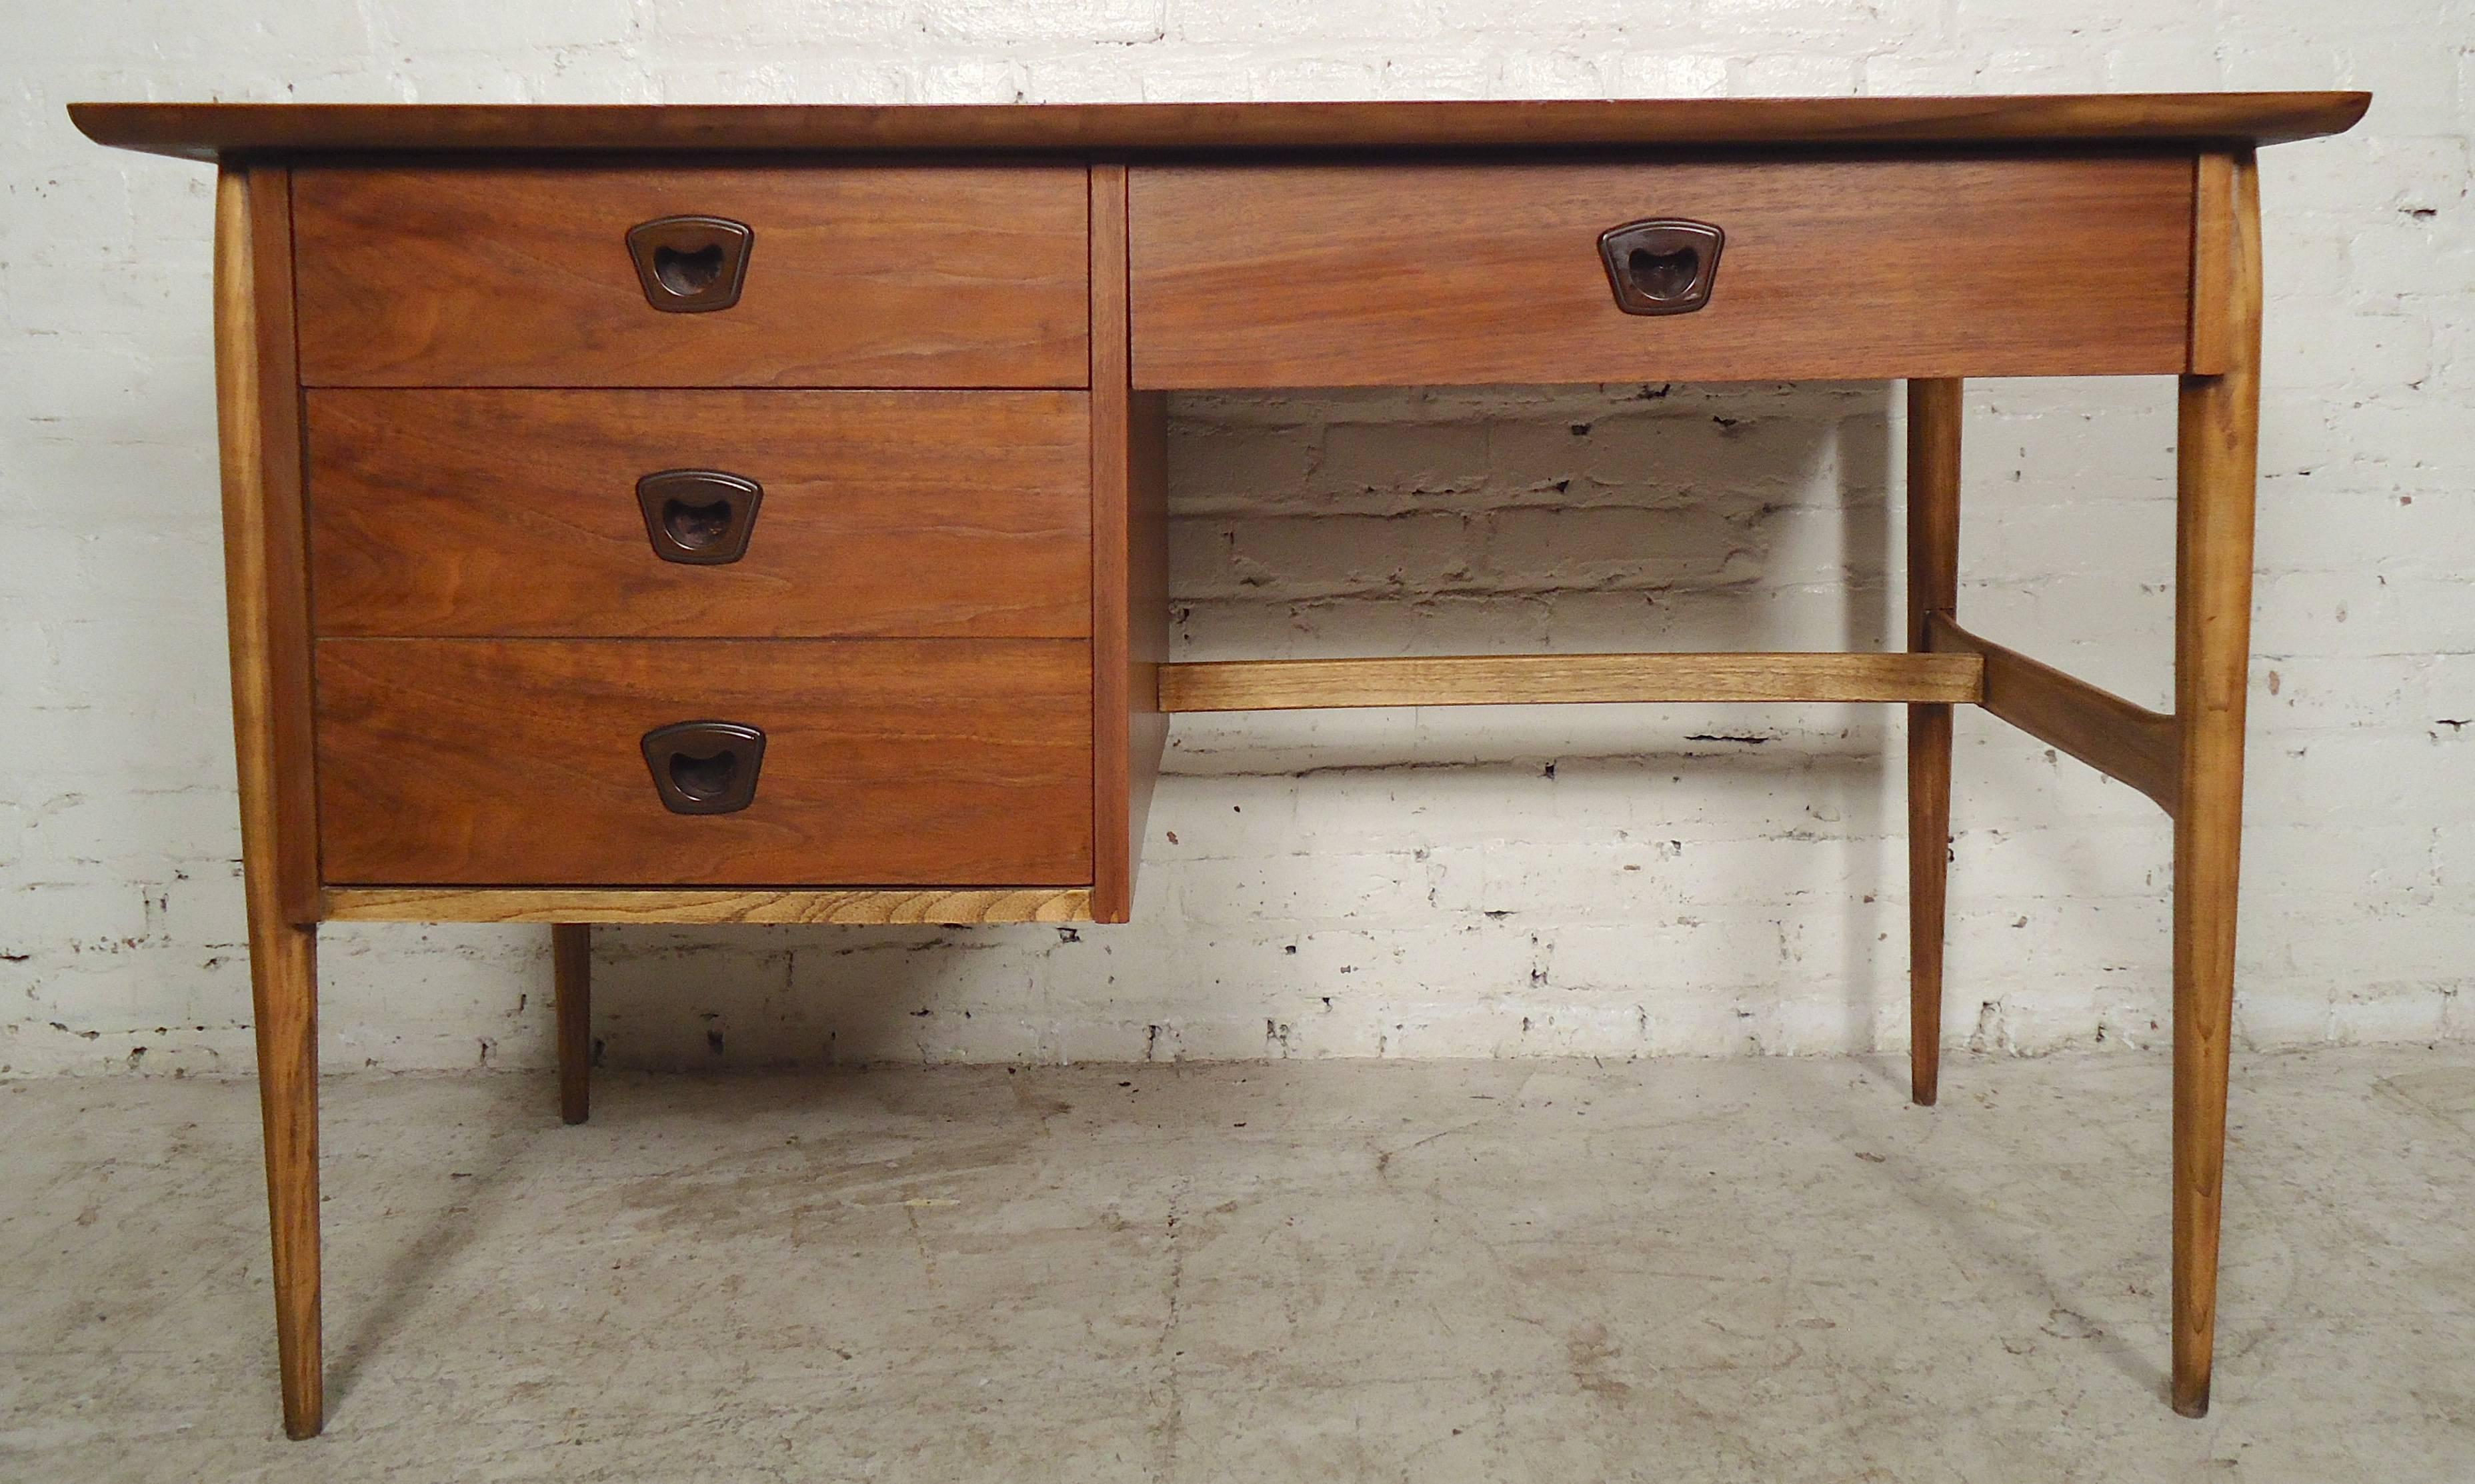 Vintage American desk with walnut grain and oak trim. Three drawers, sculpted legs and curved top.

(Please confirm item location - NY or NJ - with dealer).
 